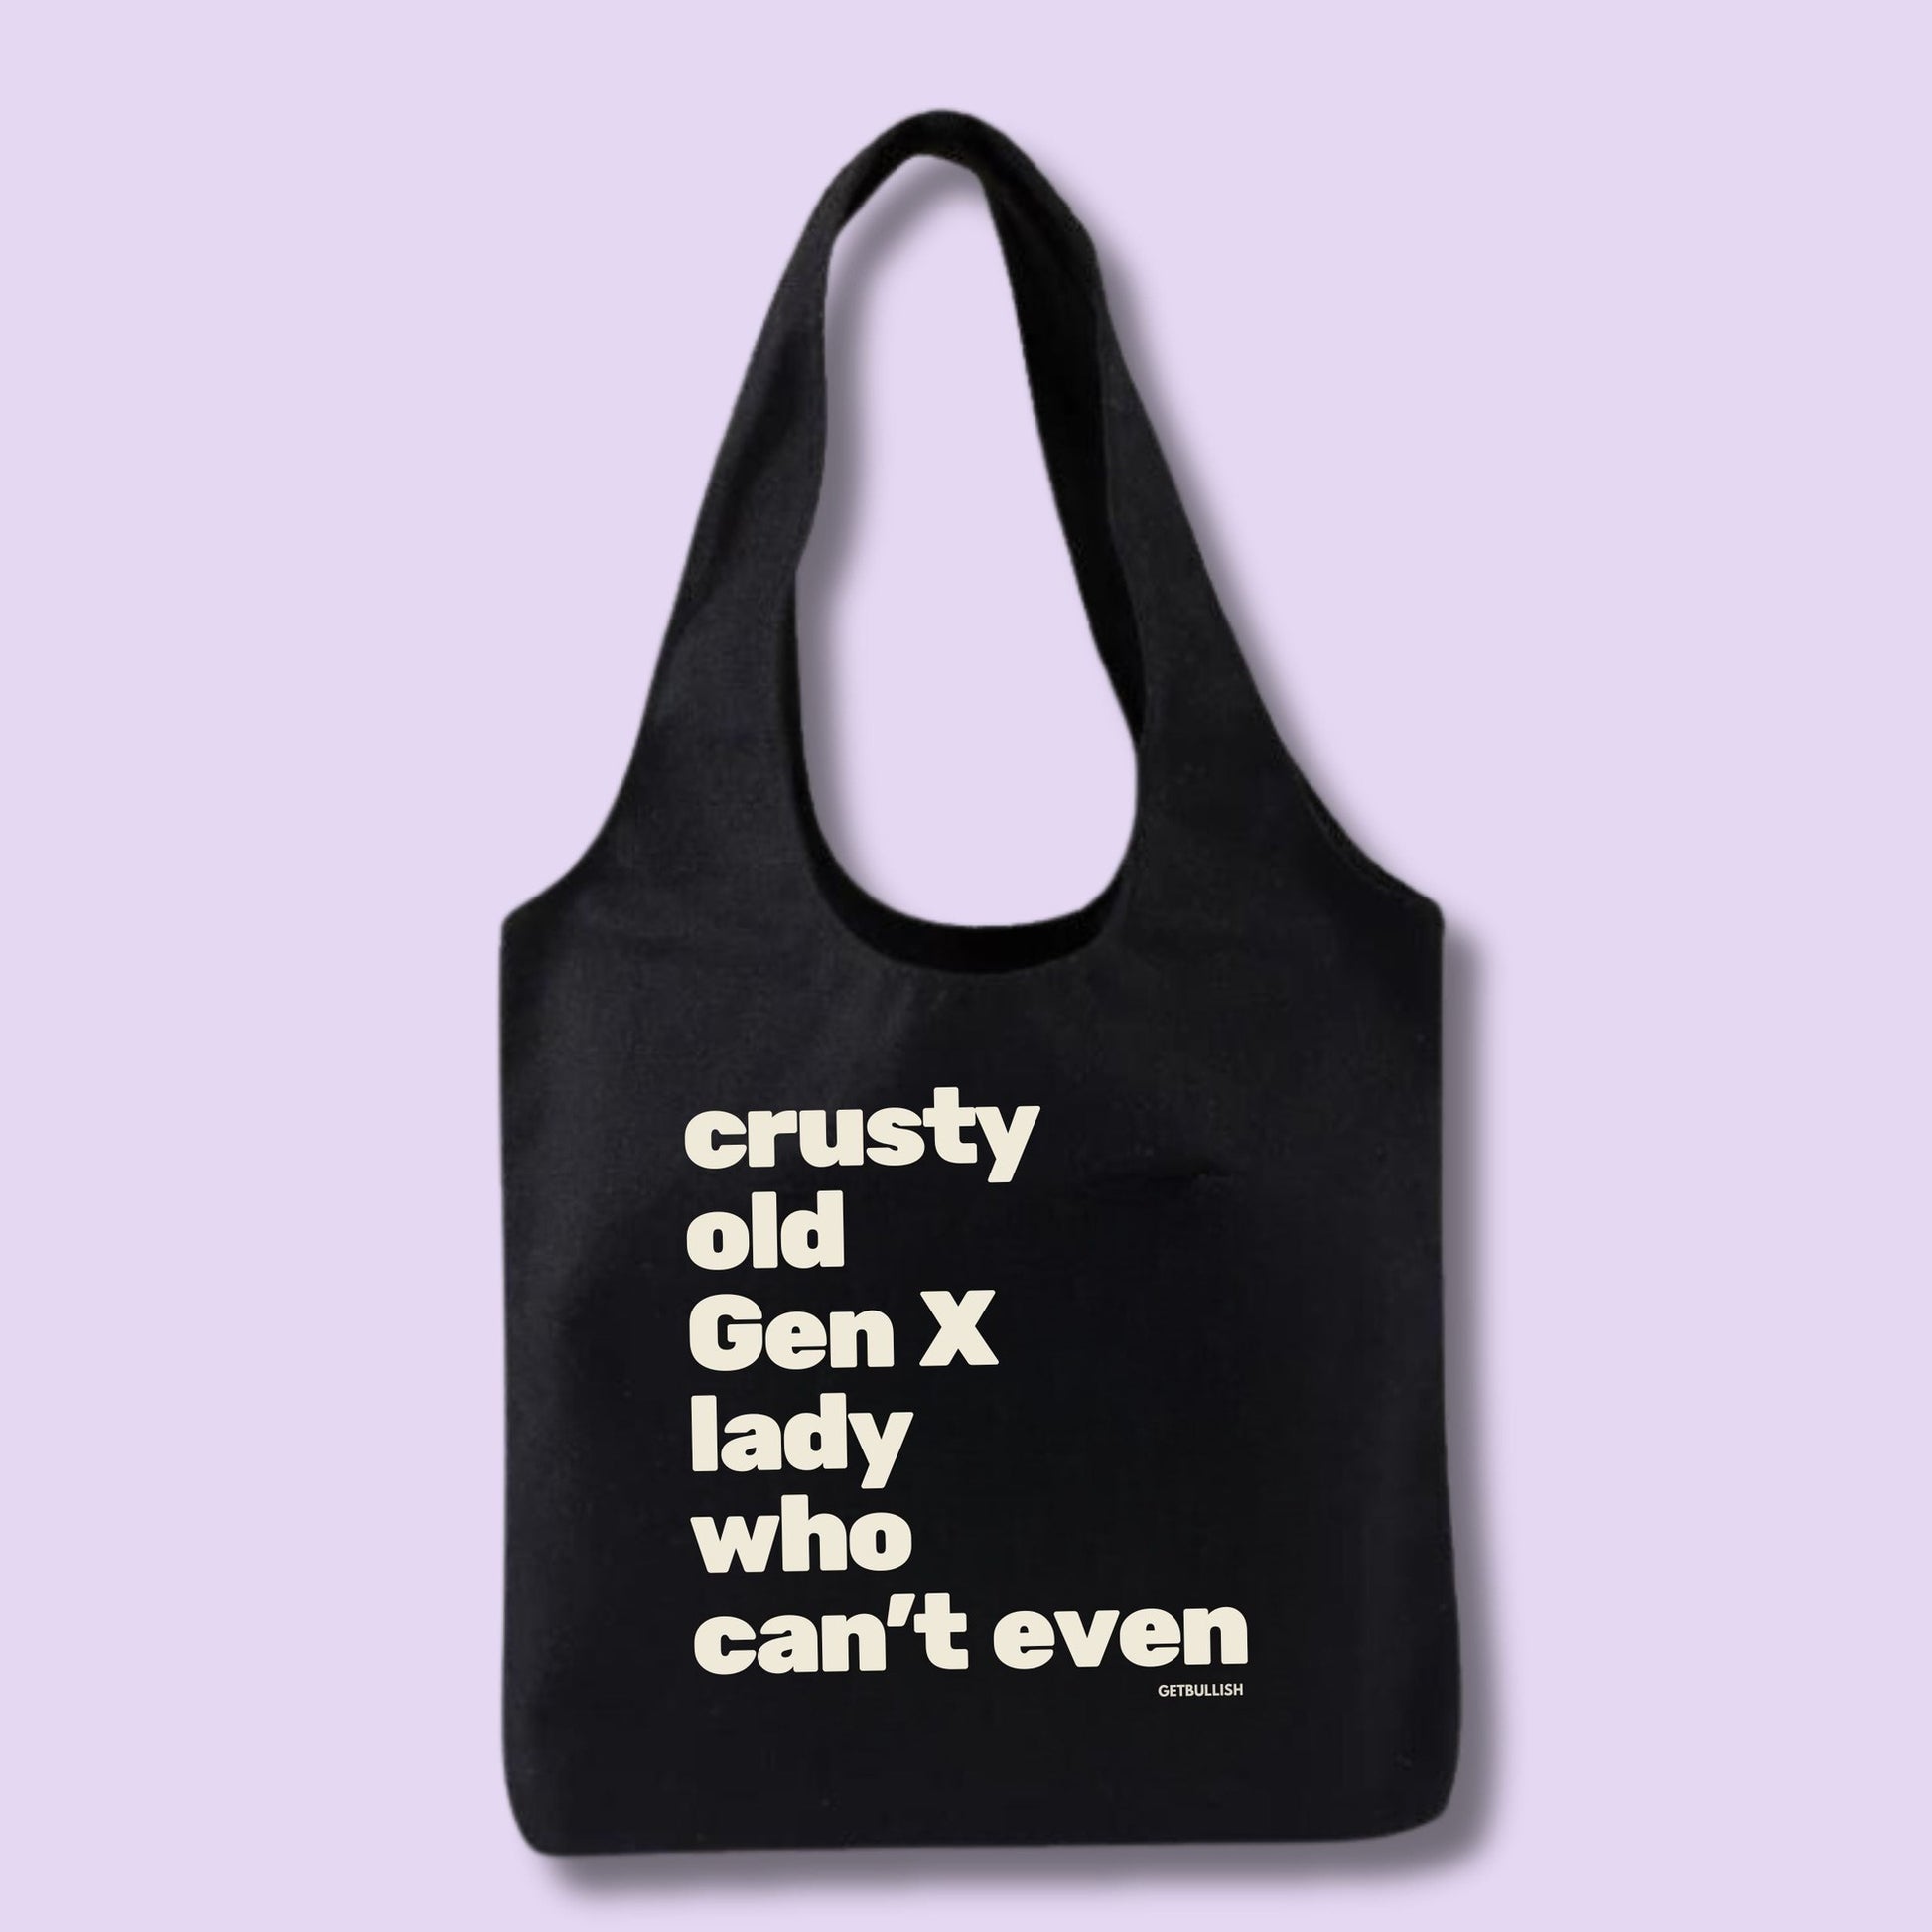 Crusty Old Gen X Lady Who Can't Even Keychain and Tote Bag Bundle | Motel Style Keyholder and Black Canvas Tote